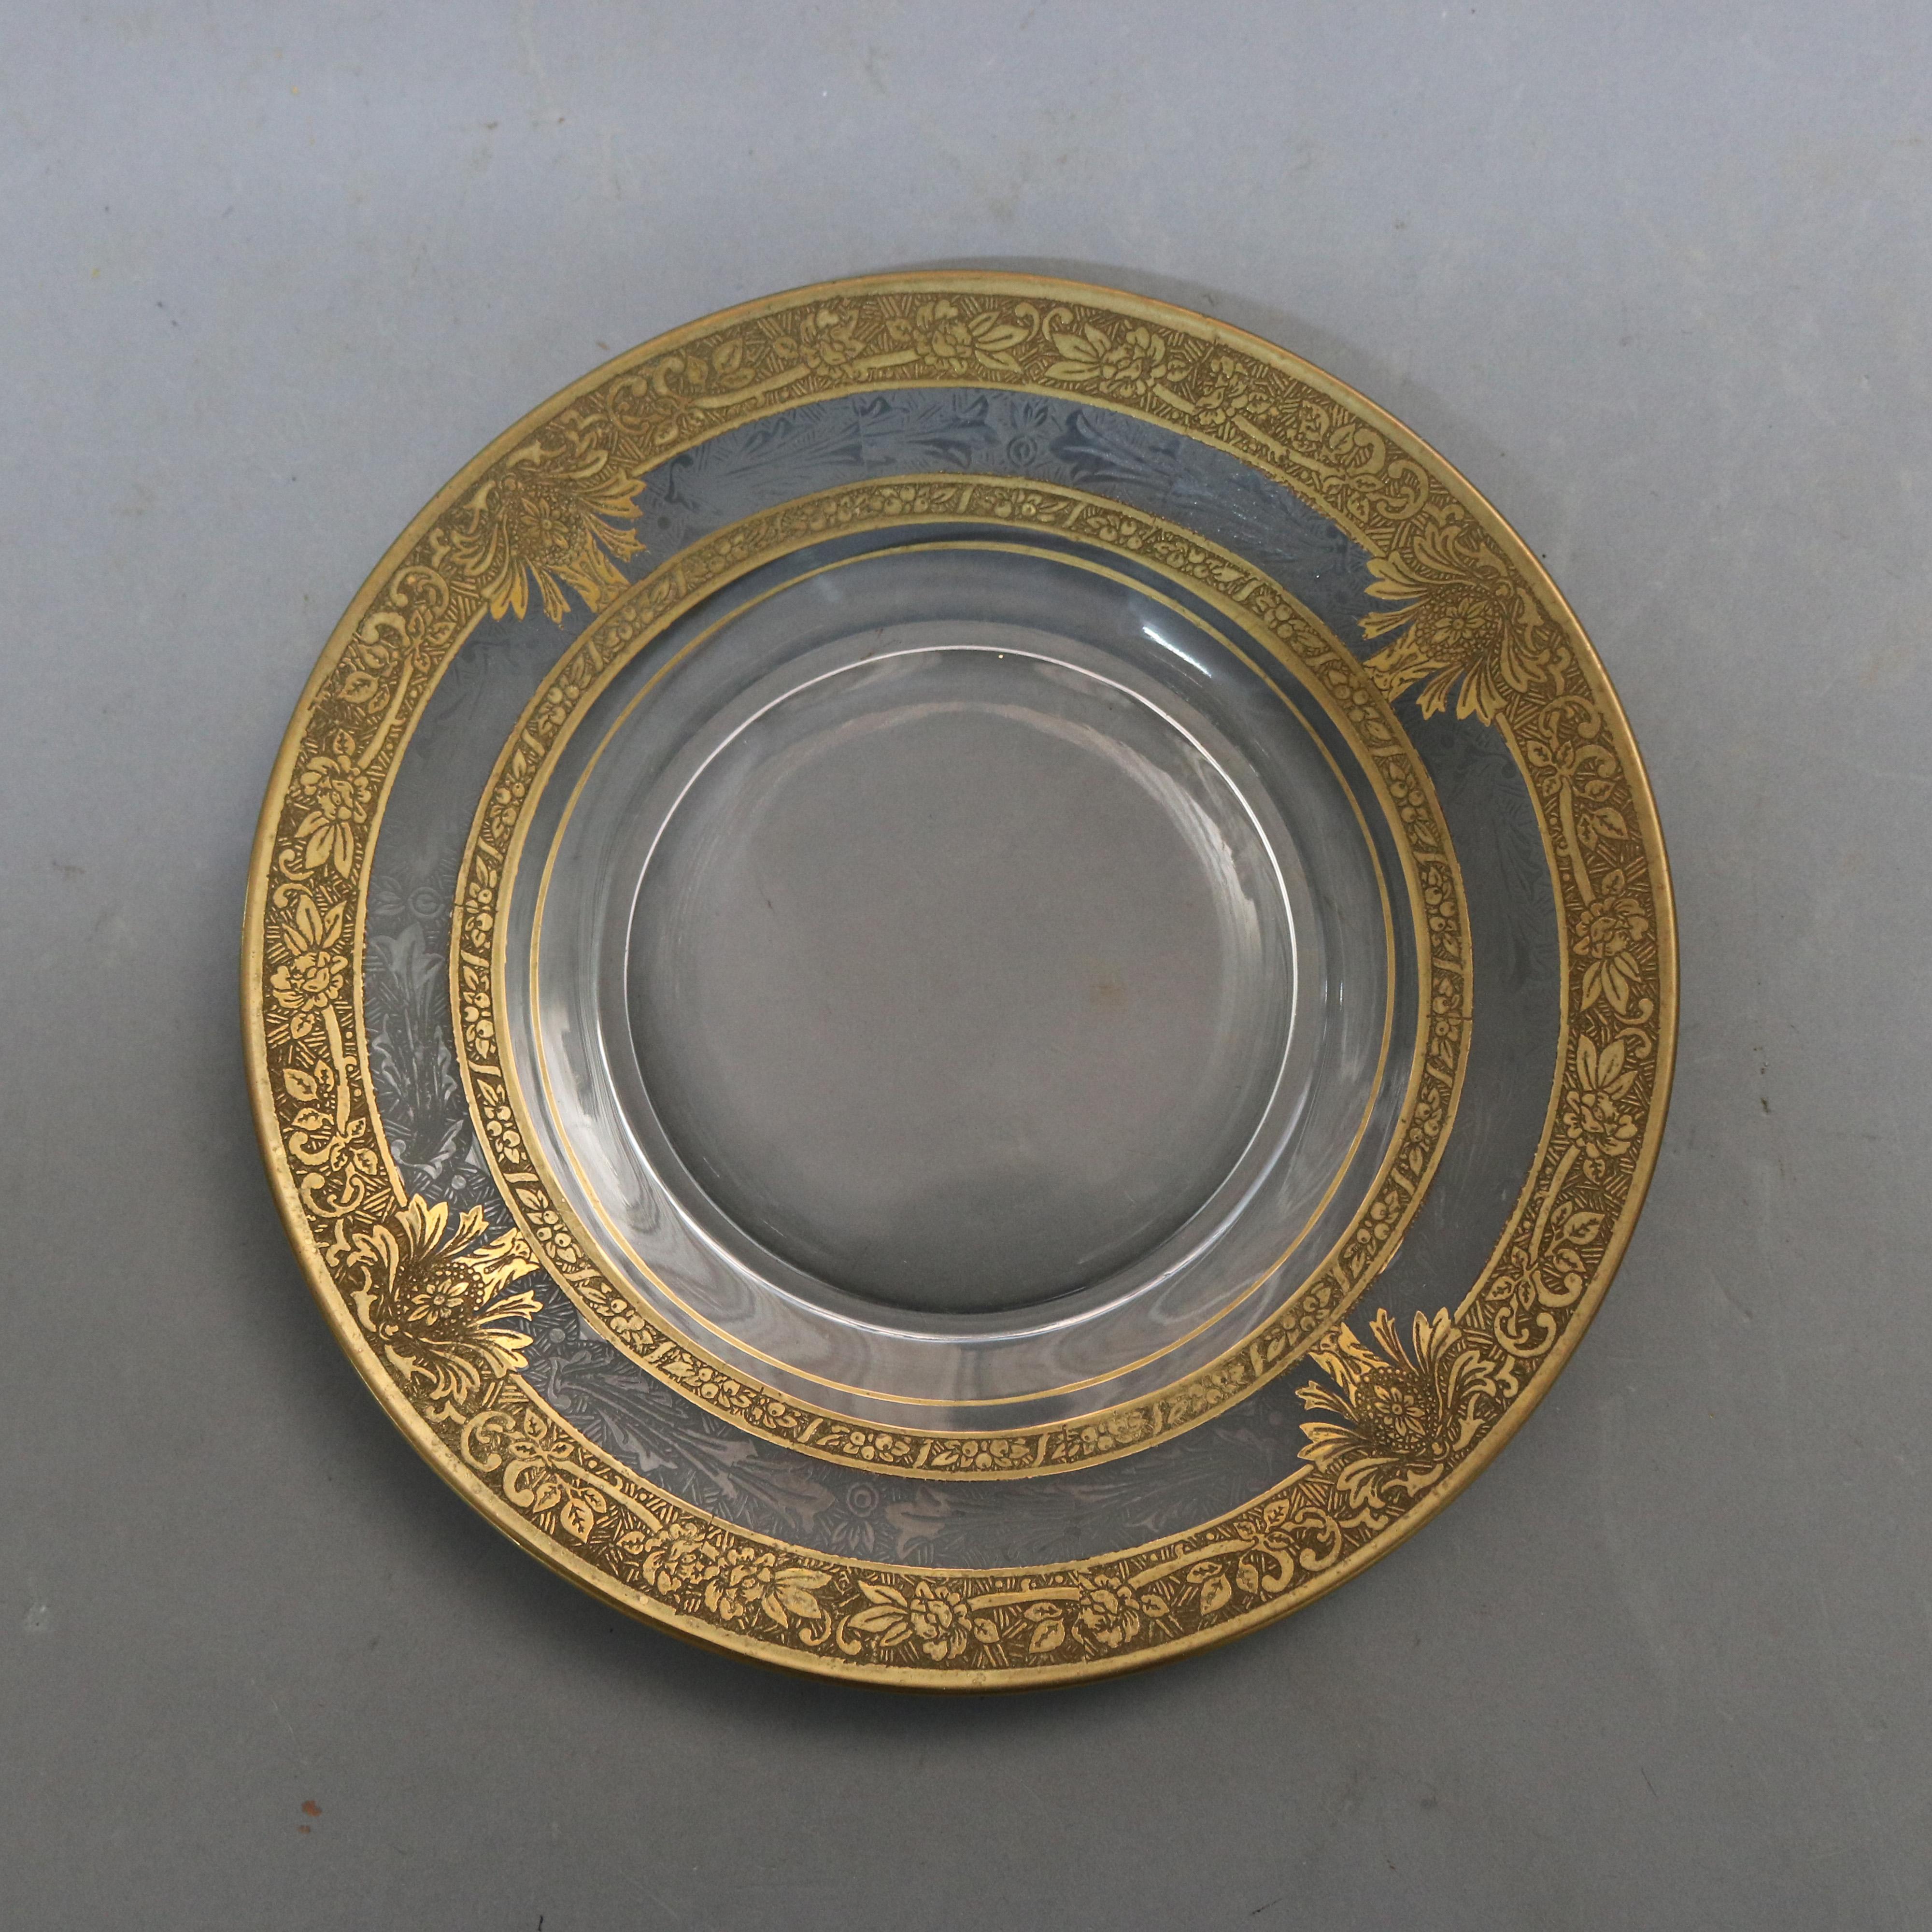 An antique set of 16 dessert plates each offers colorless glass with foliate etched rim with fruit, scroll and foliate gold gilt decoration, 20th century

***DELIVERY NOTICE – Due to COVID-19 we are employing NO-CONTACT PRACTICES in the transfer of